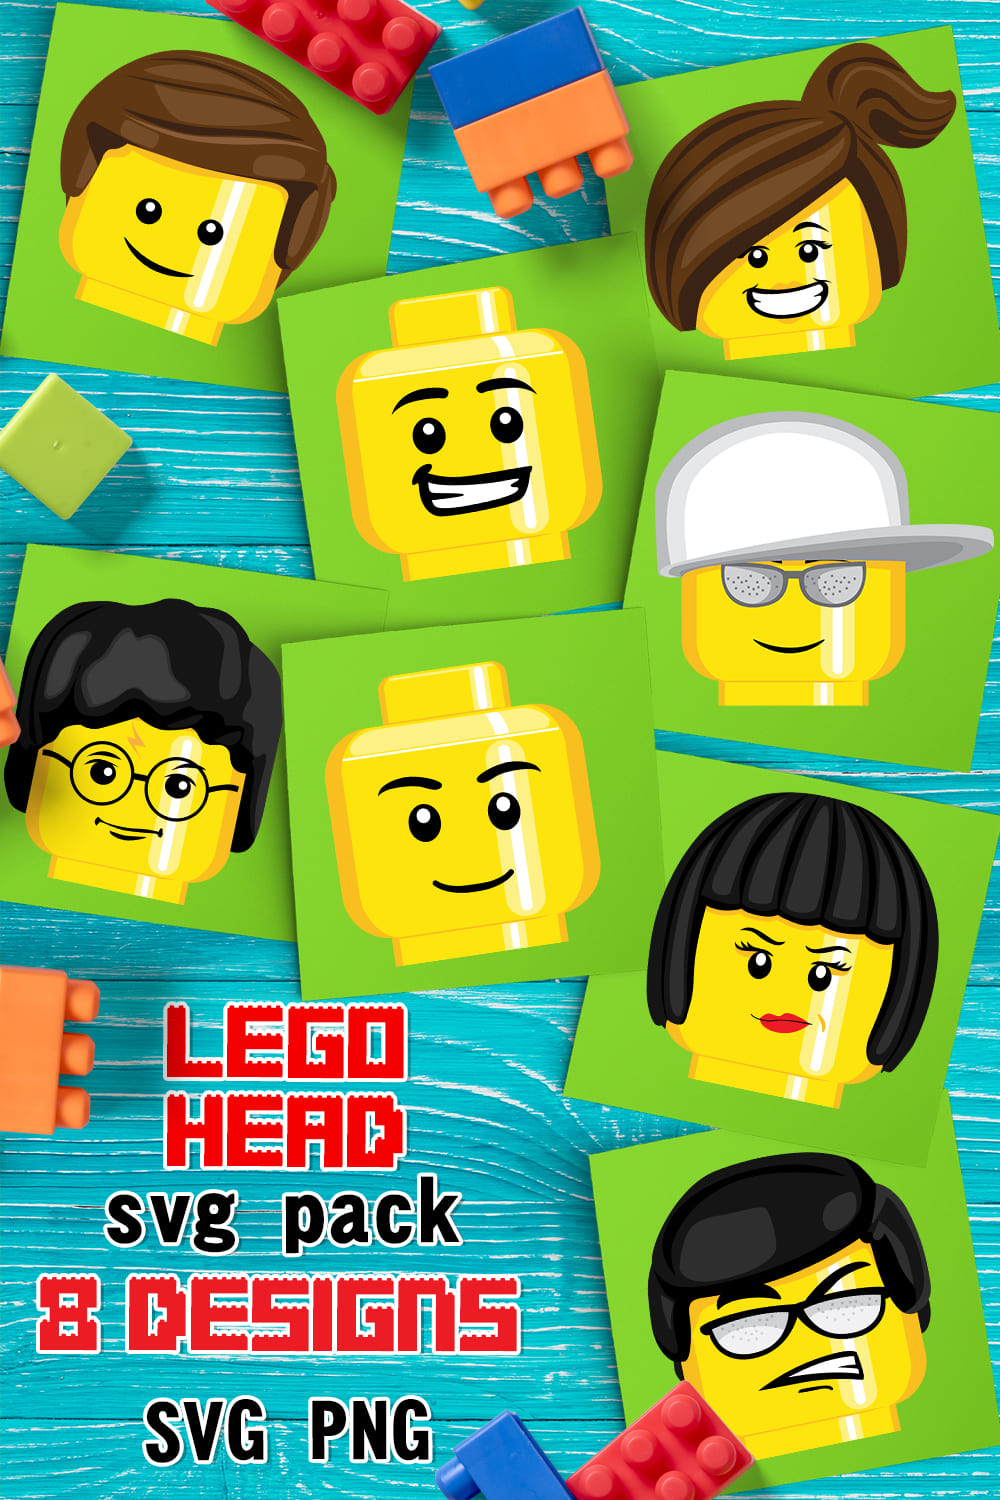 Lego head svg - pinterest image preview.